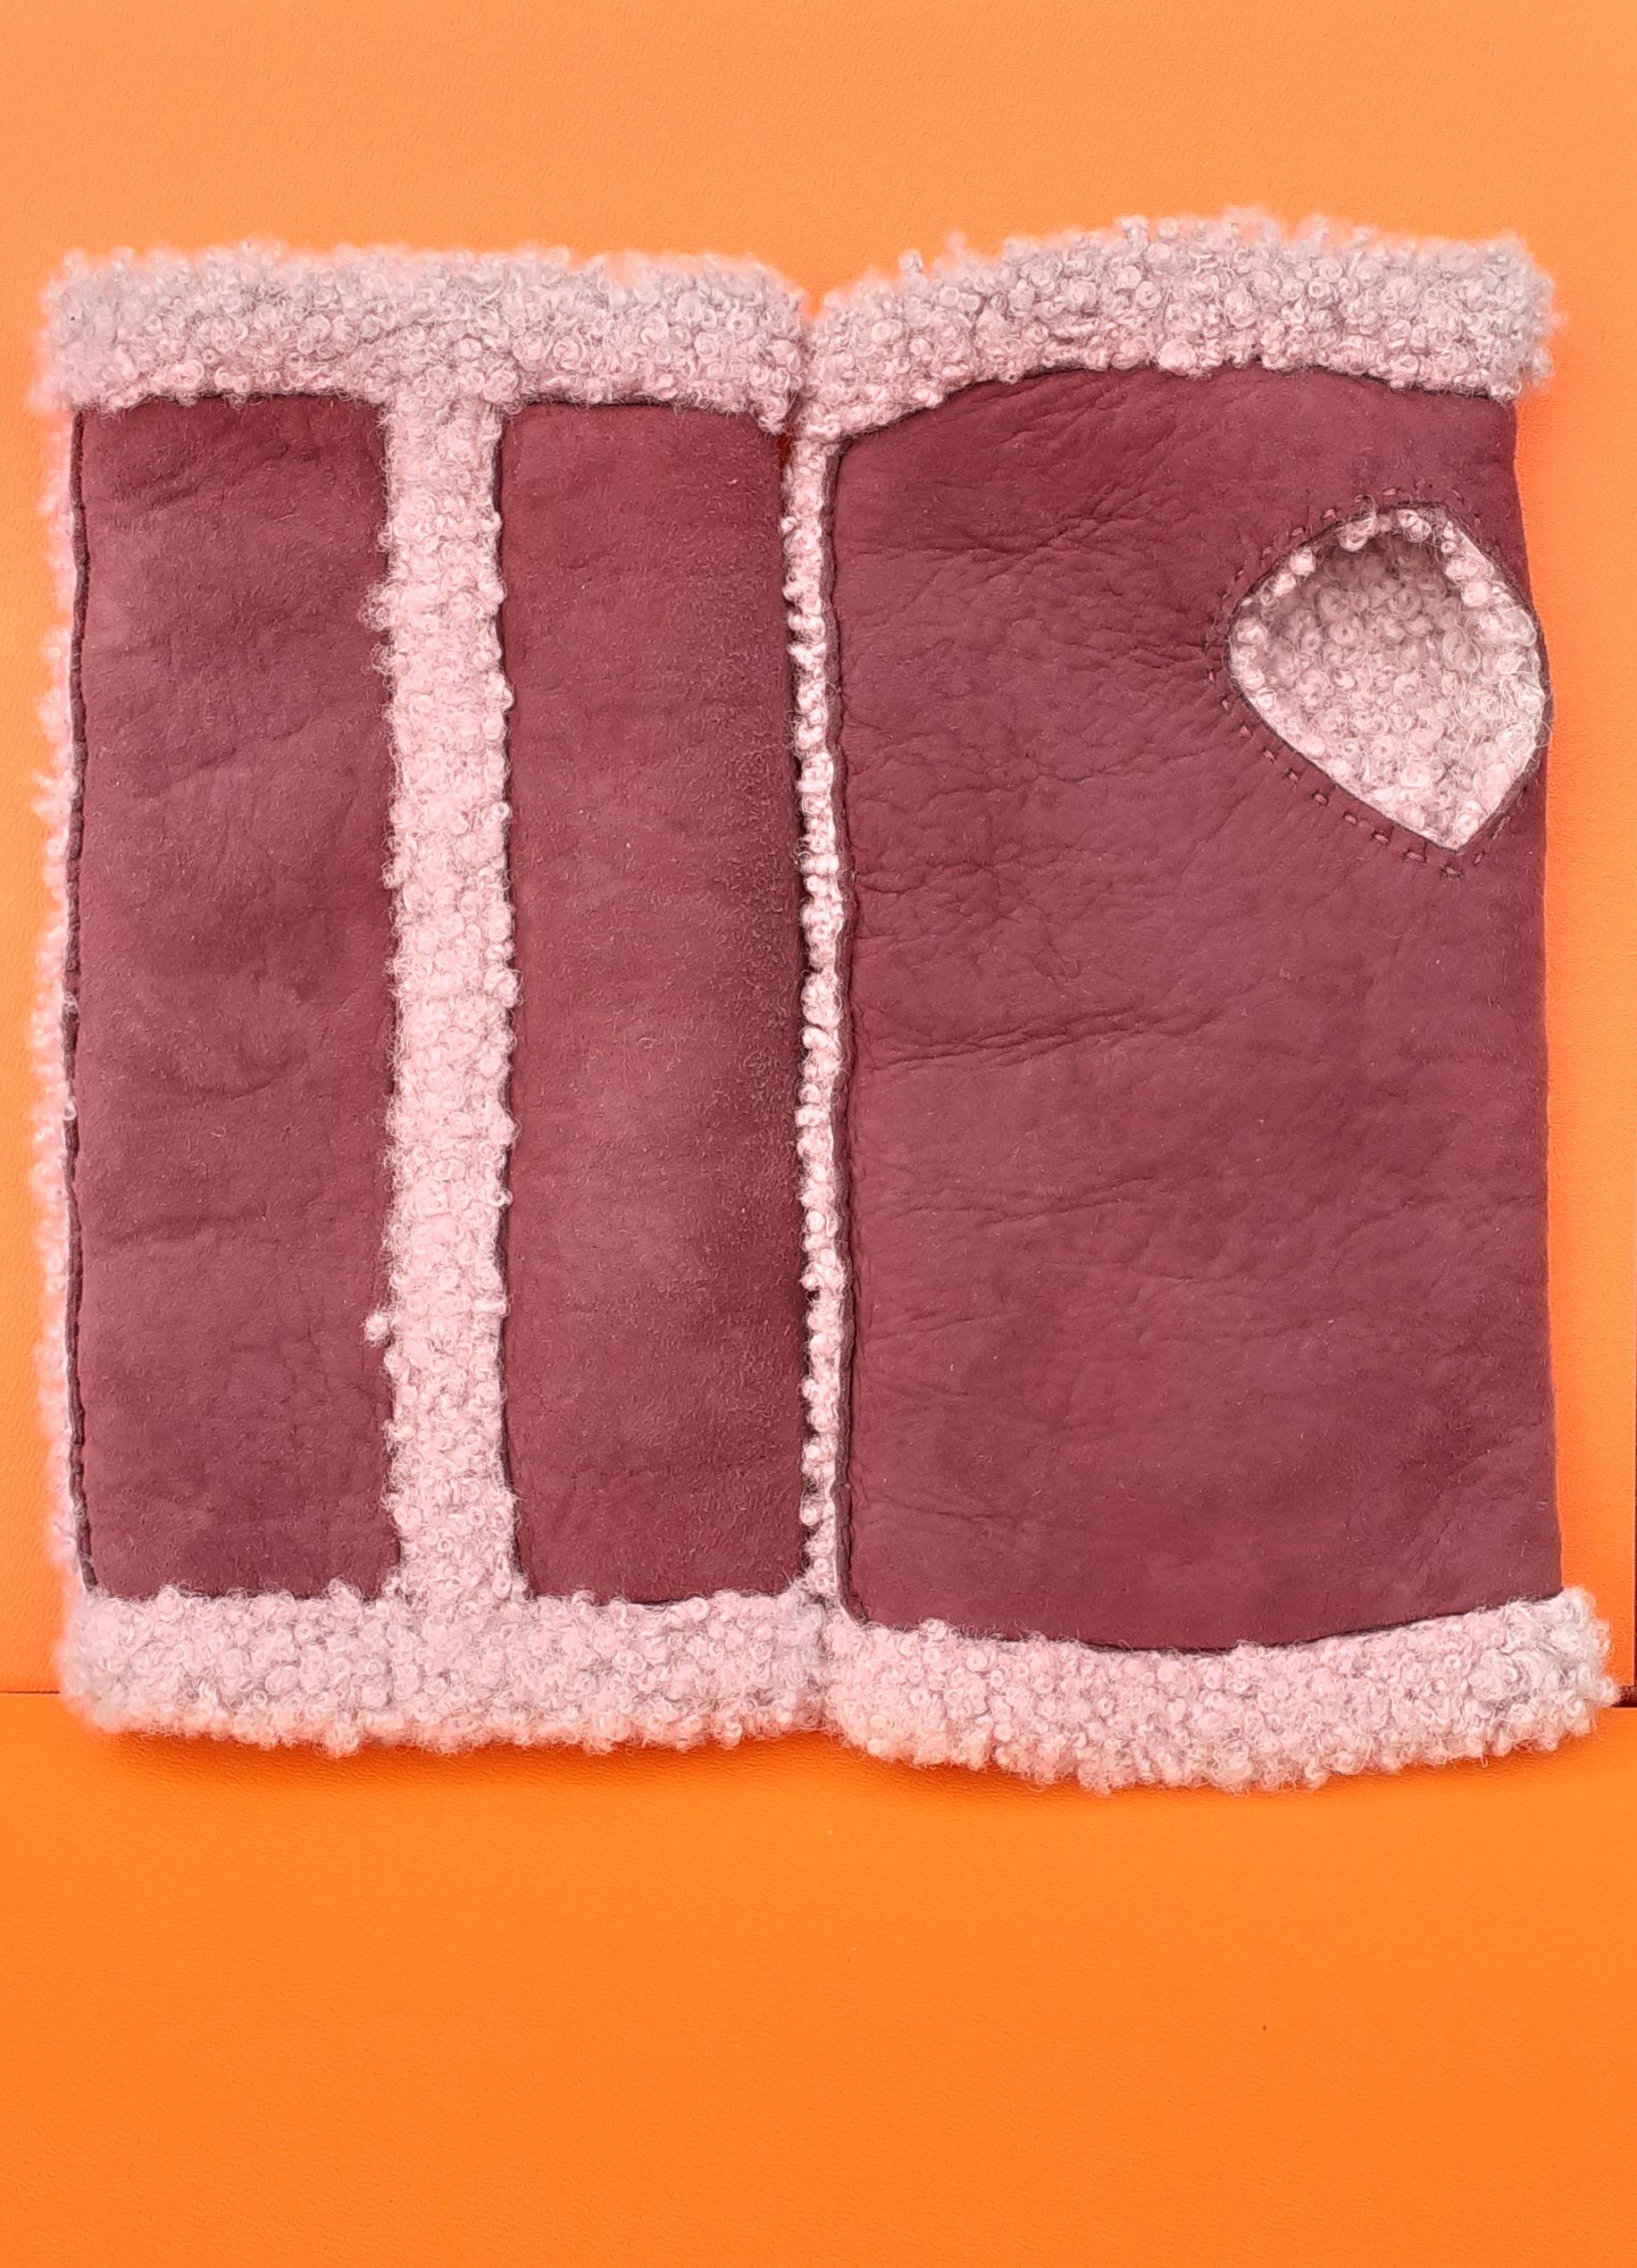 Warm and Cozy Authentic Hermès Mittens

